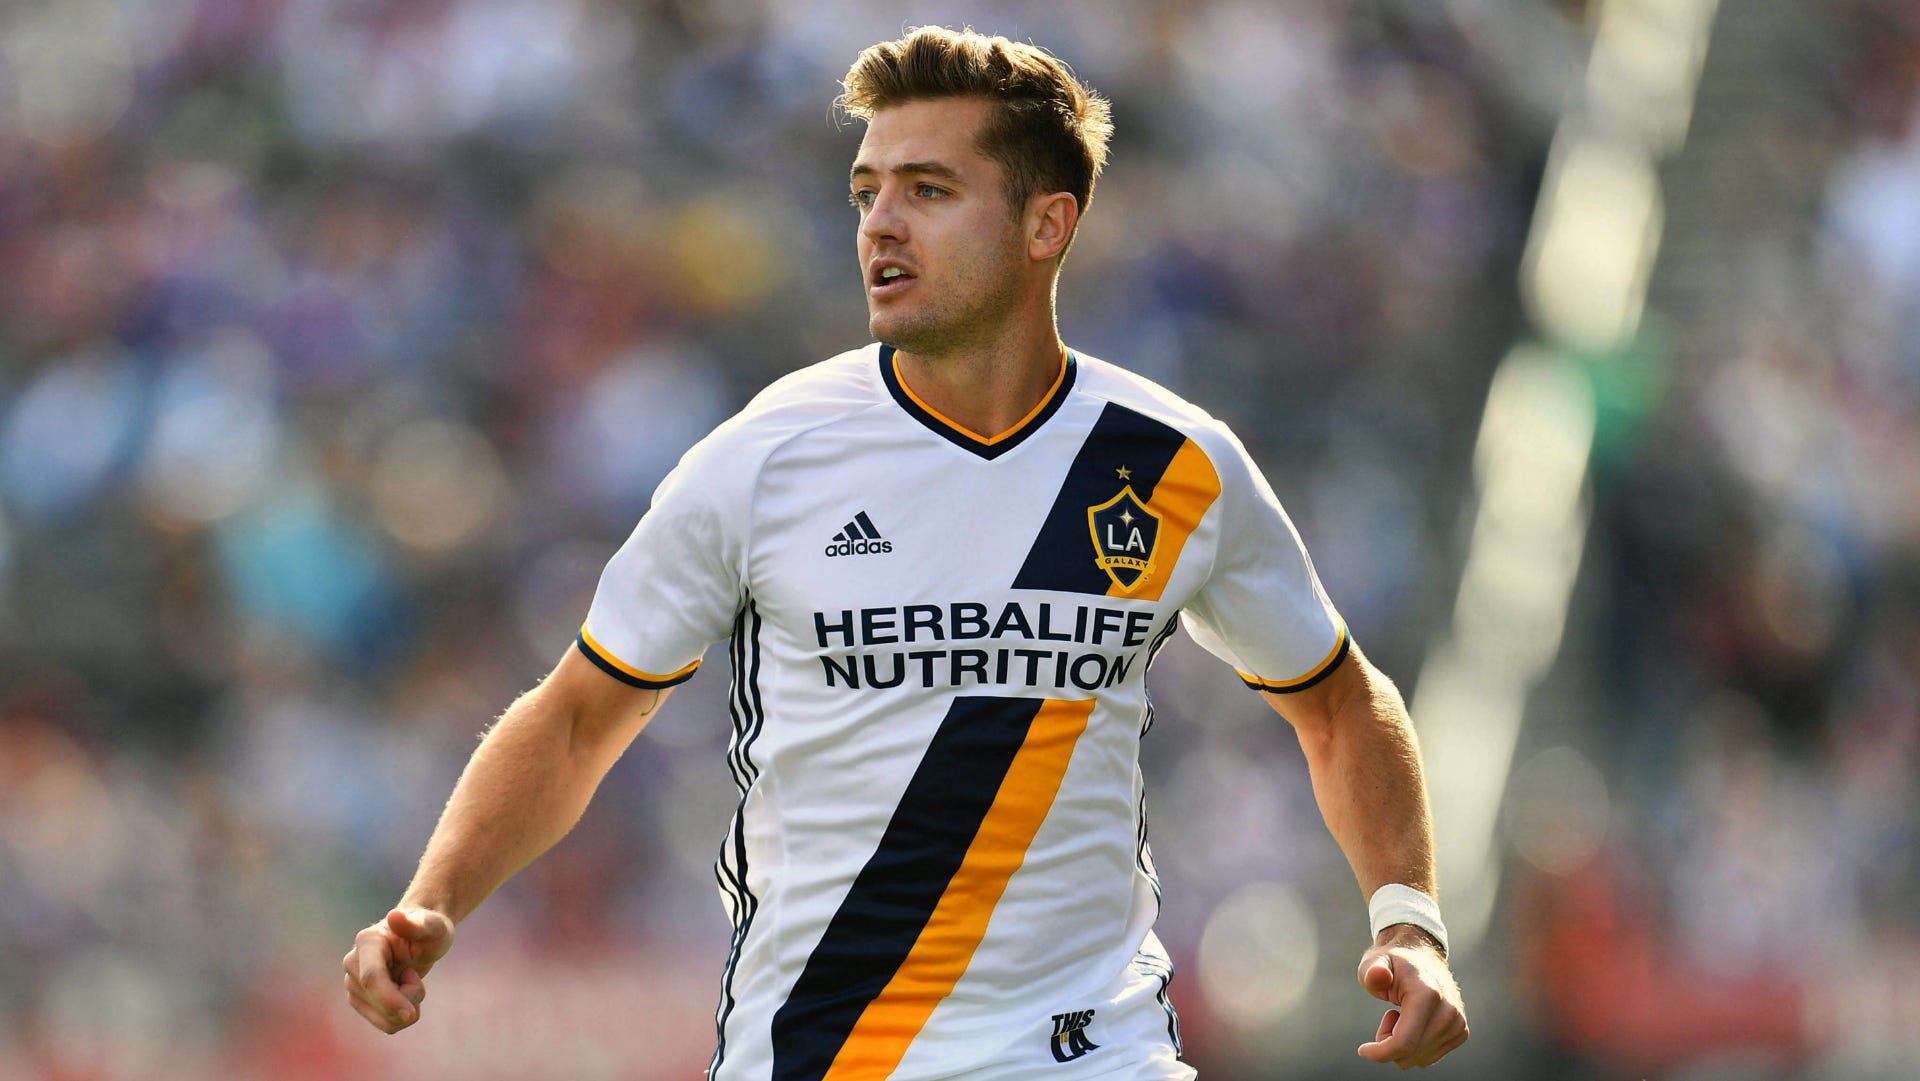 Trailblazing Openly Gay Athlete Robbie Rogers Retires From Professional Soccer